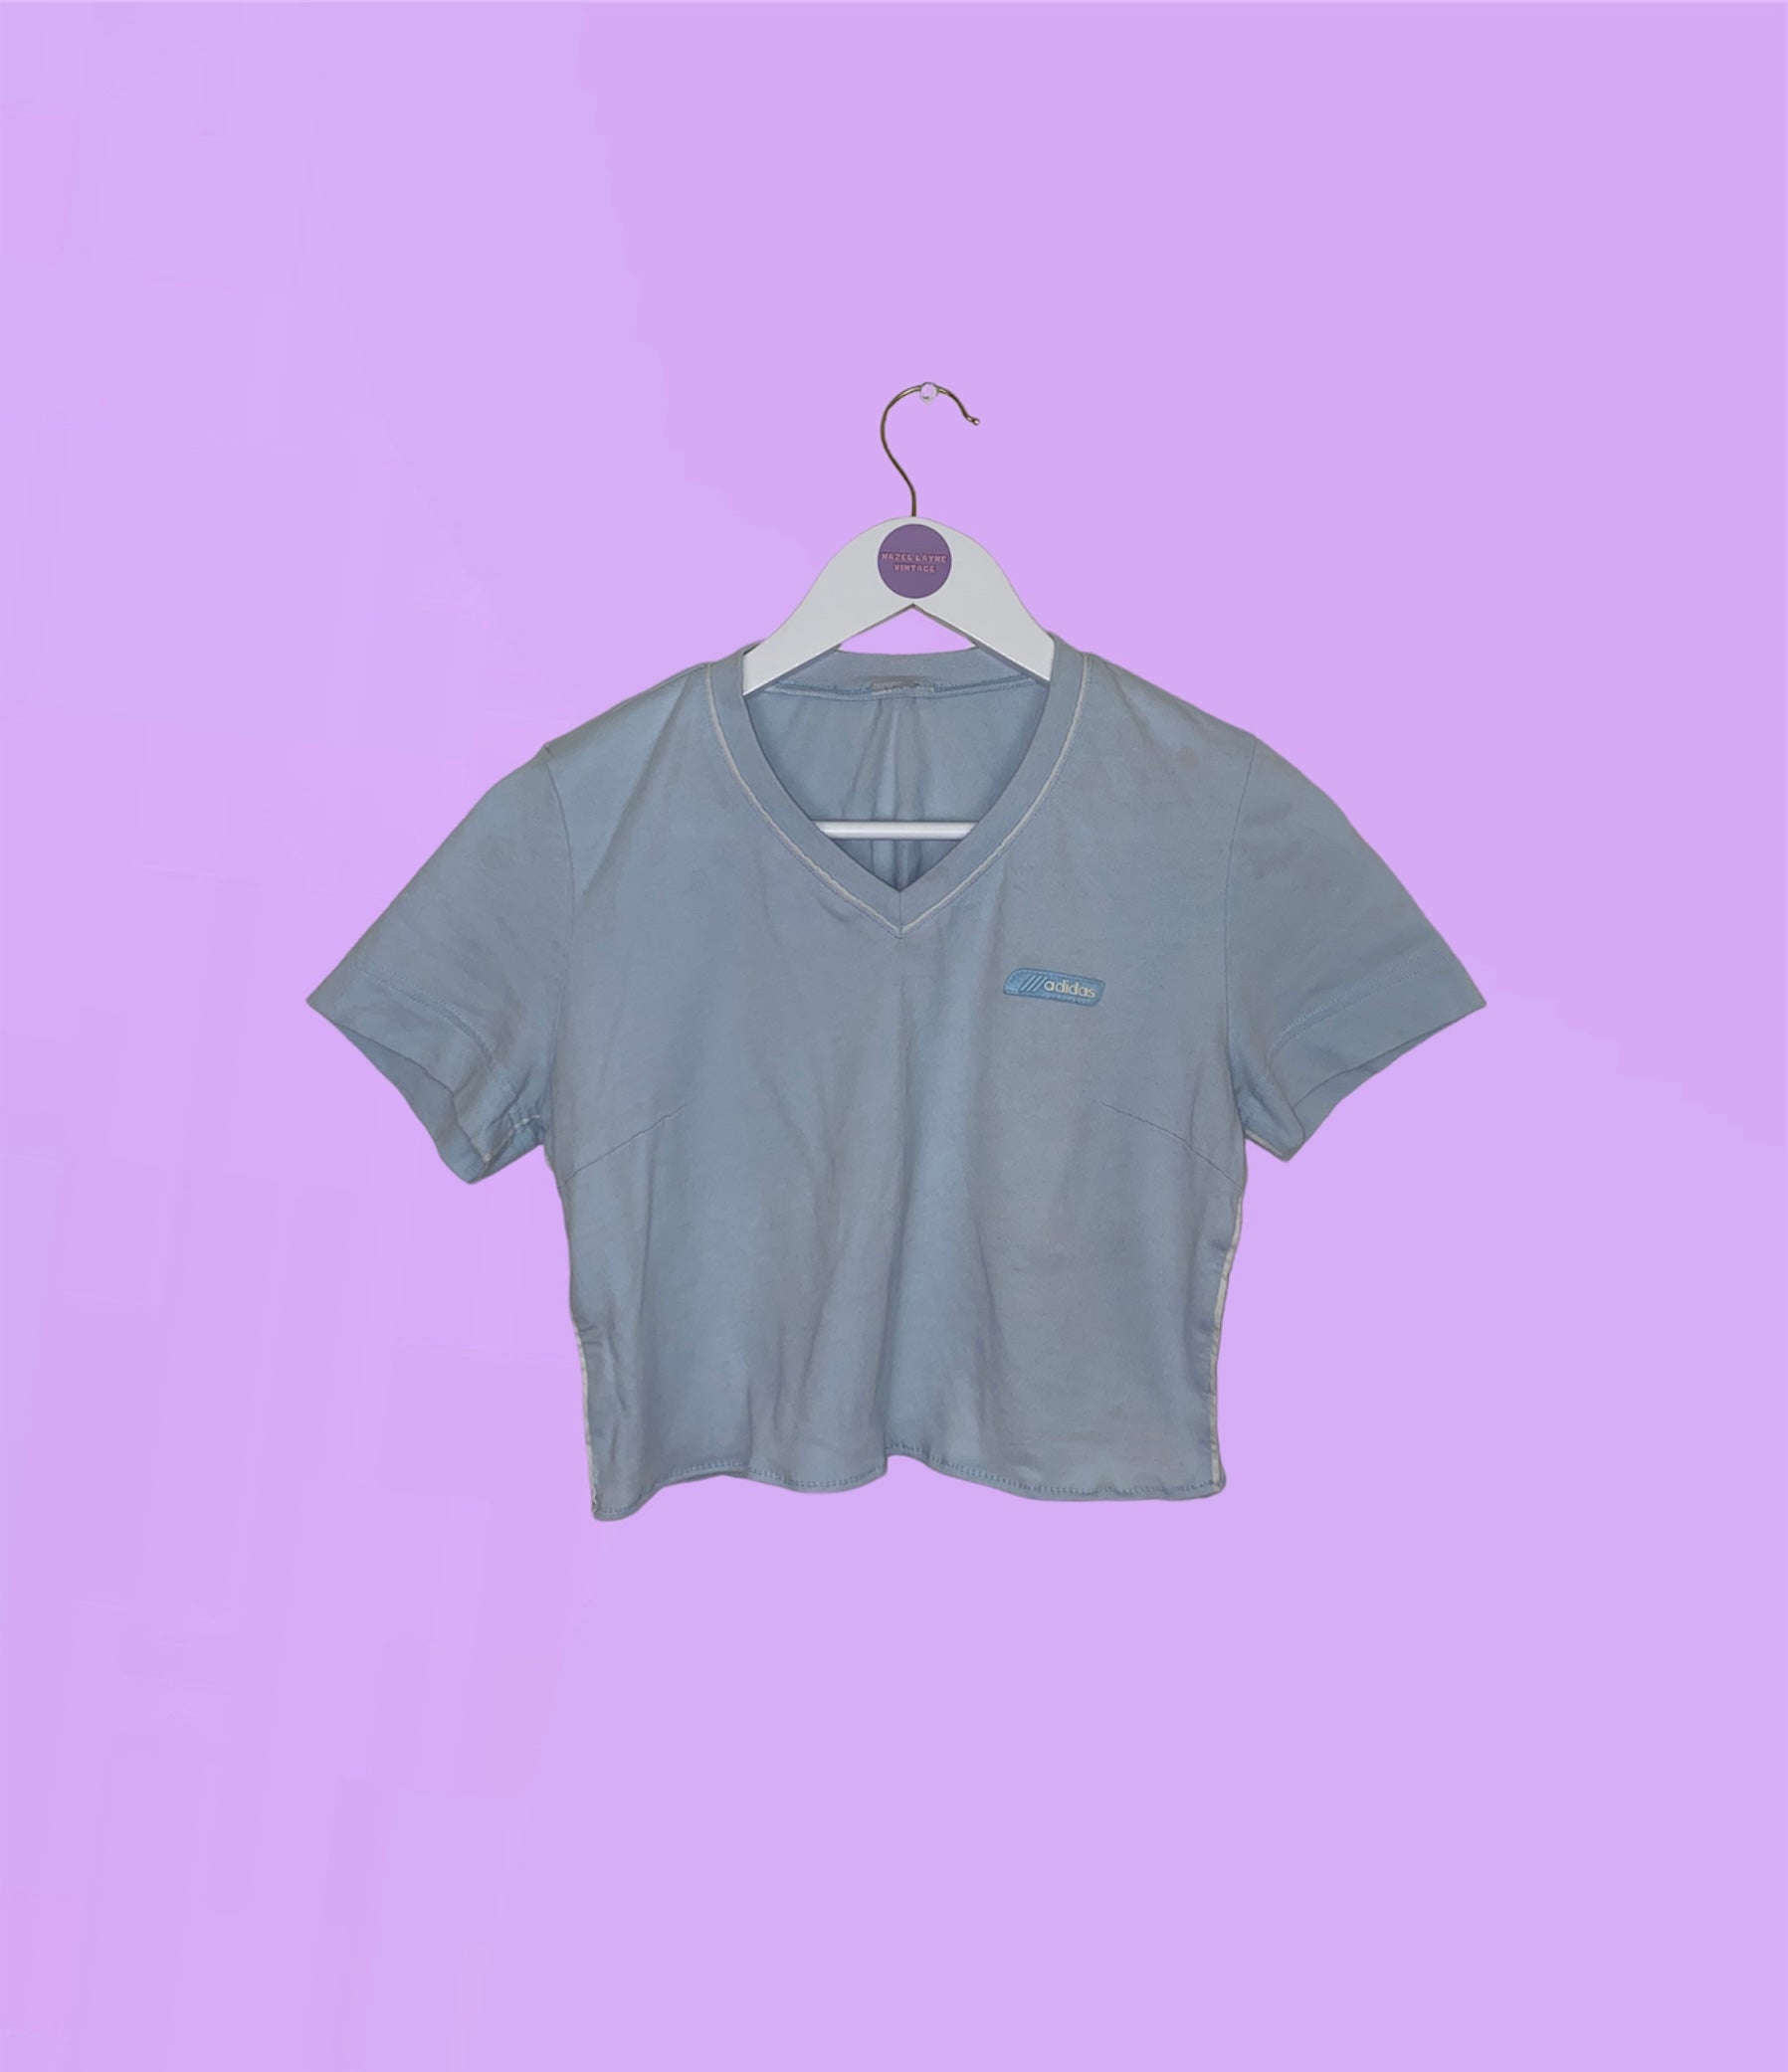 light blue short sleeve crop top with white adidas logo shown on a lilac background